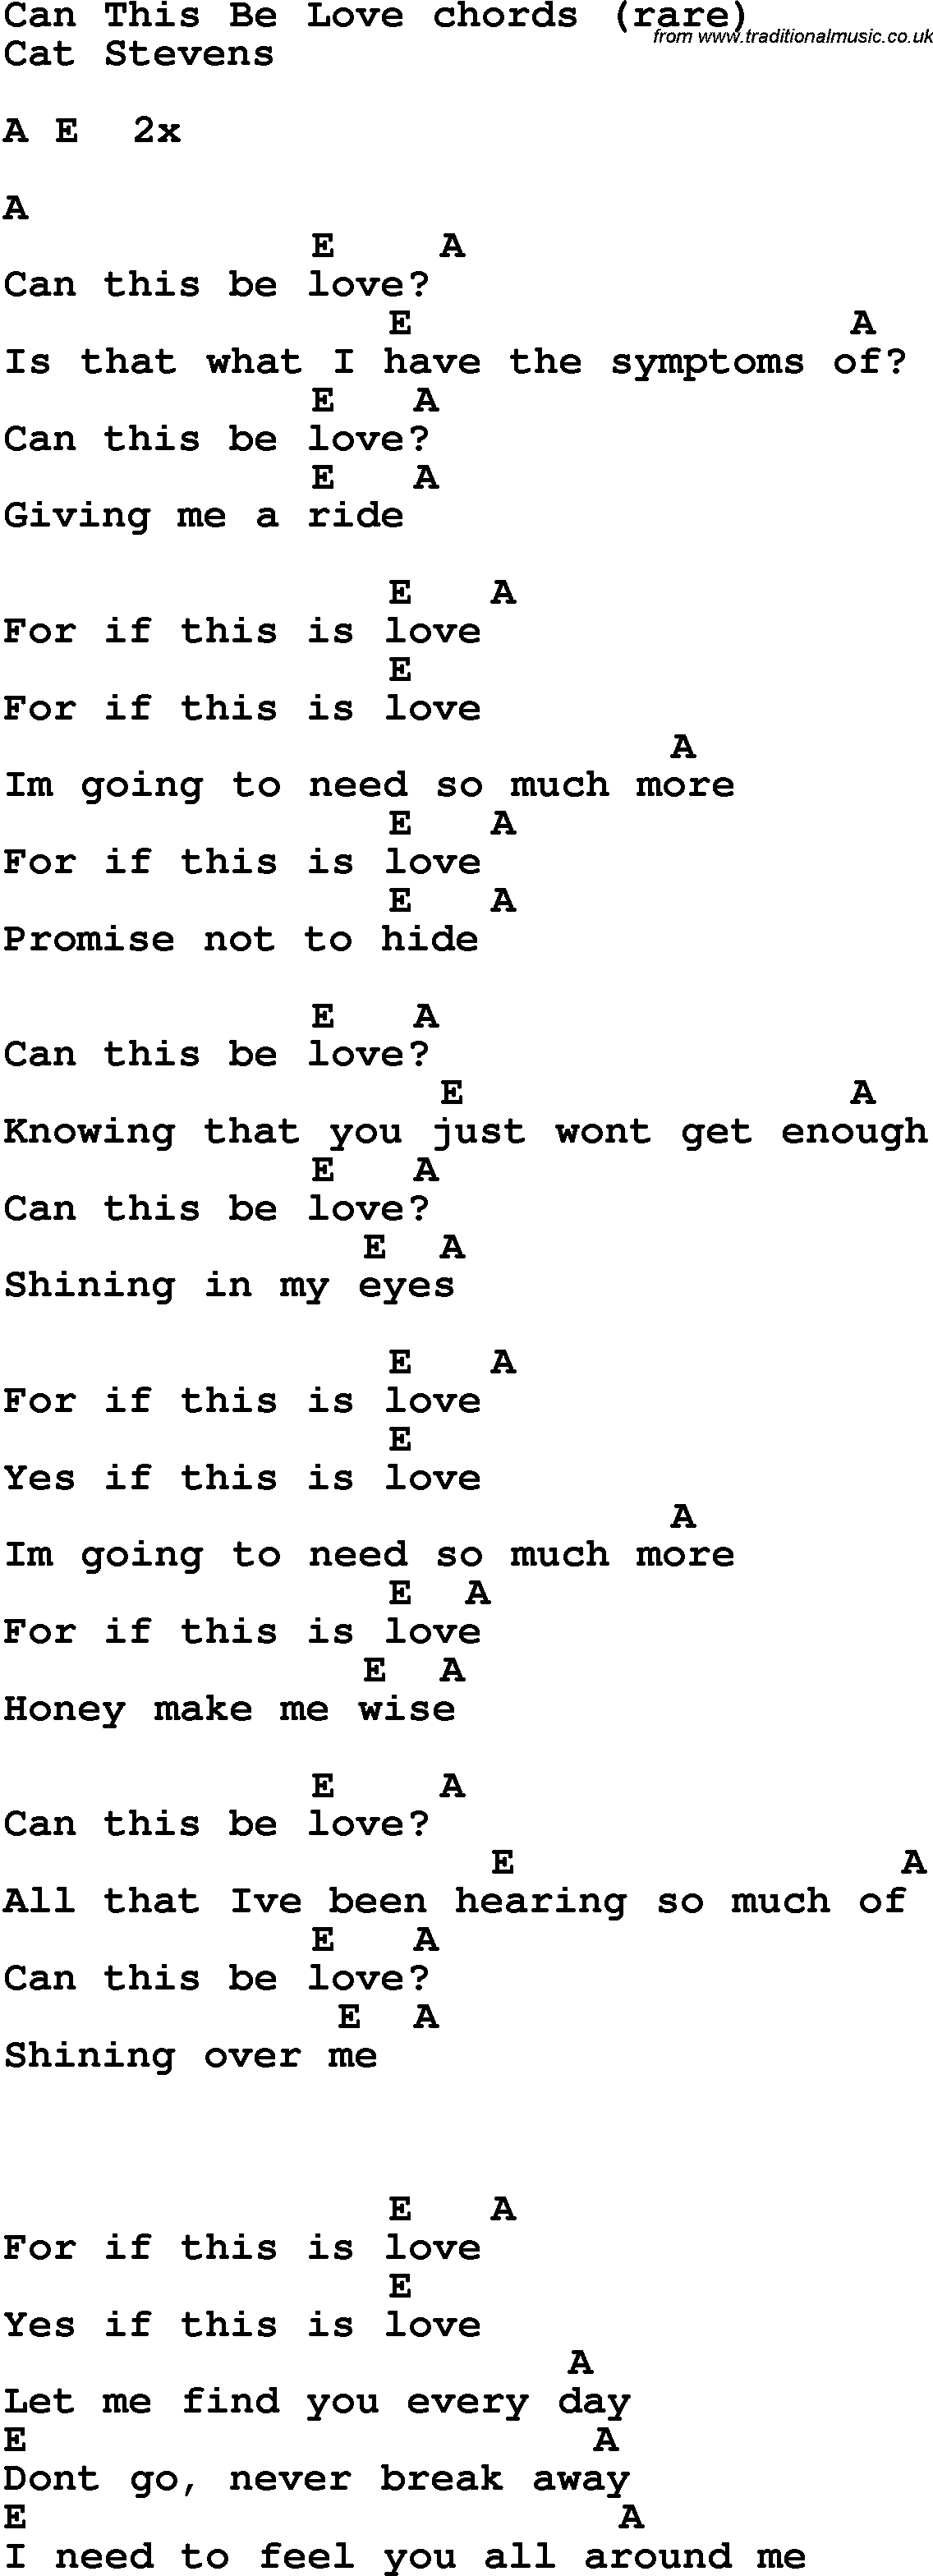 Song Lyrics with guitar chords for Can This Be Love